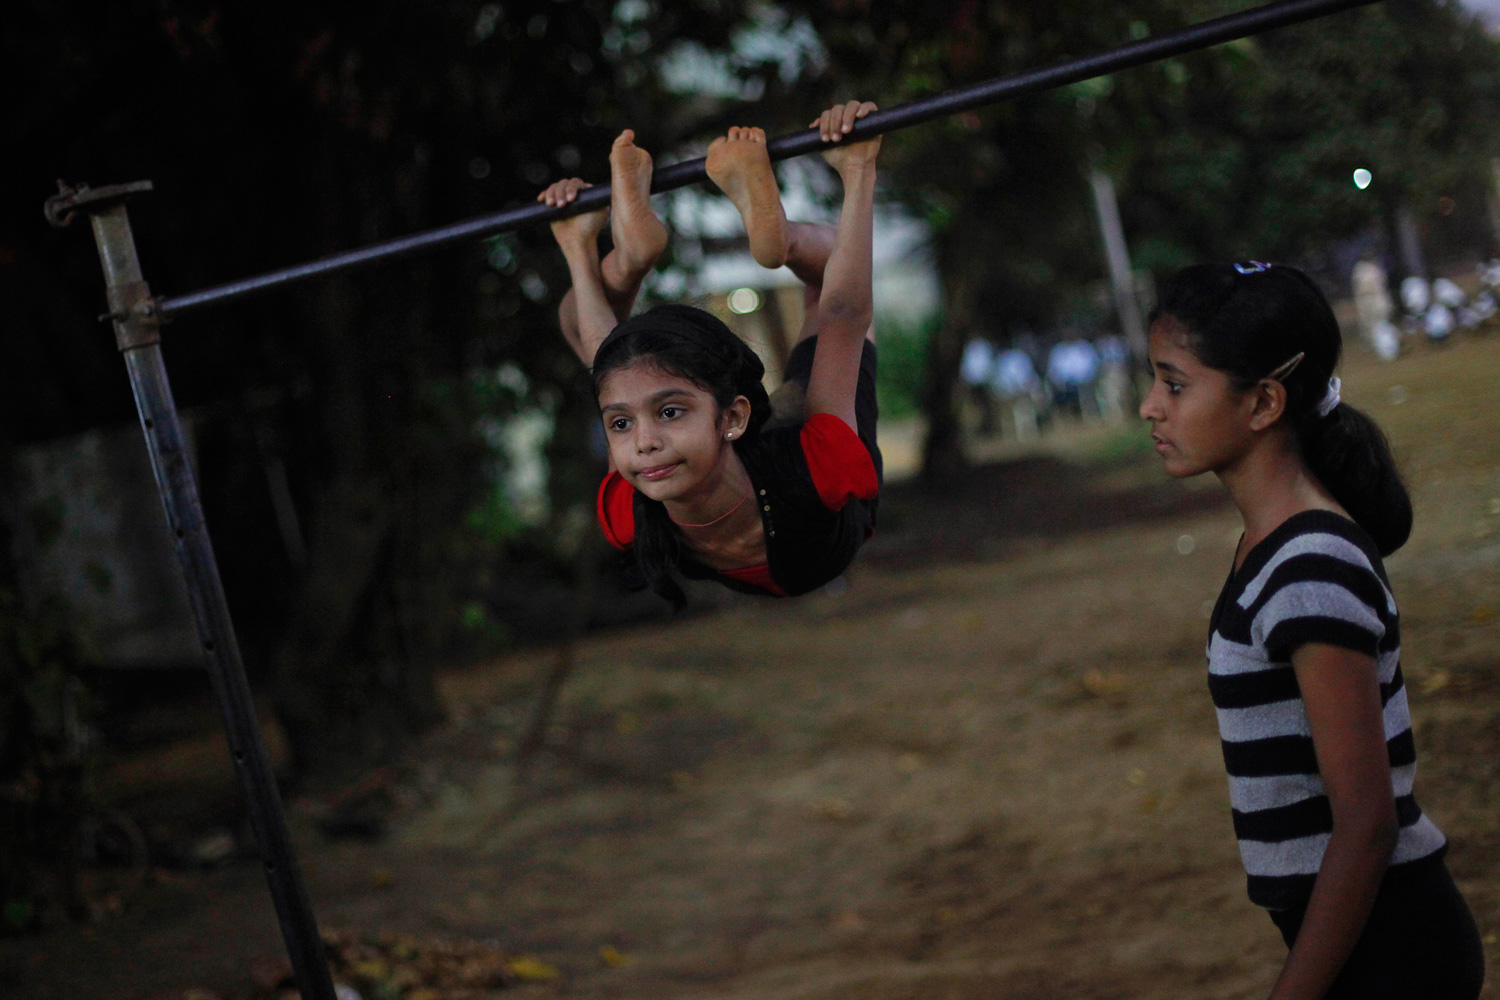 March 27, 2012. A girl exercises on a high bar during a gymnastics practice session at a park in Mumbai.